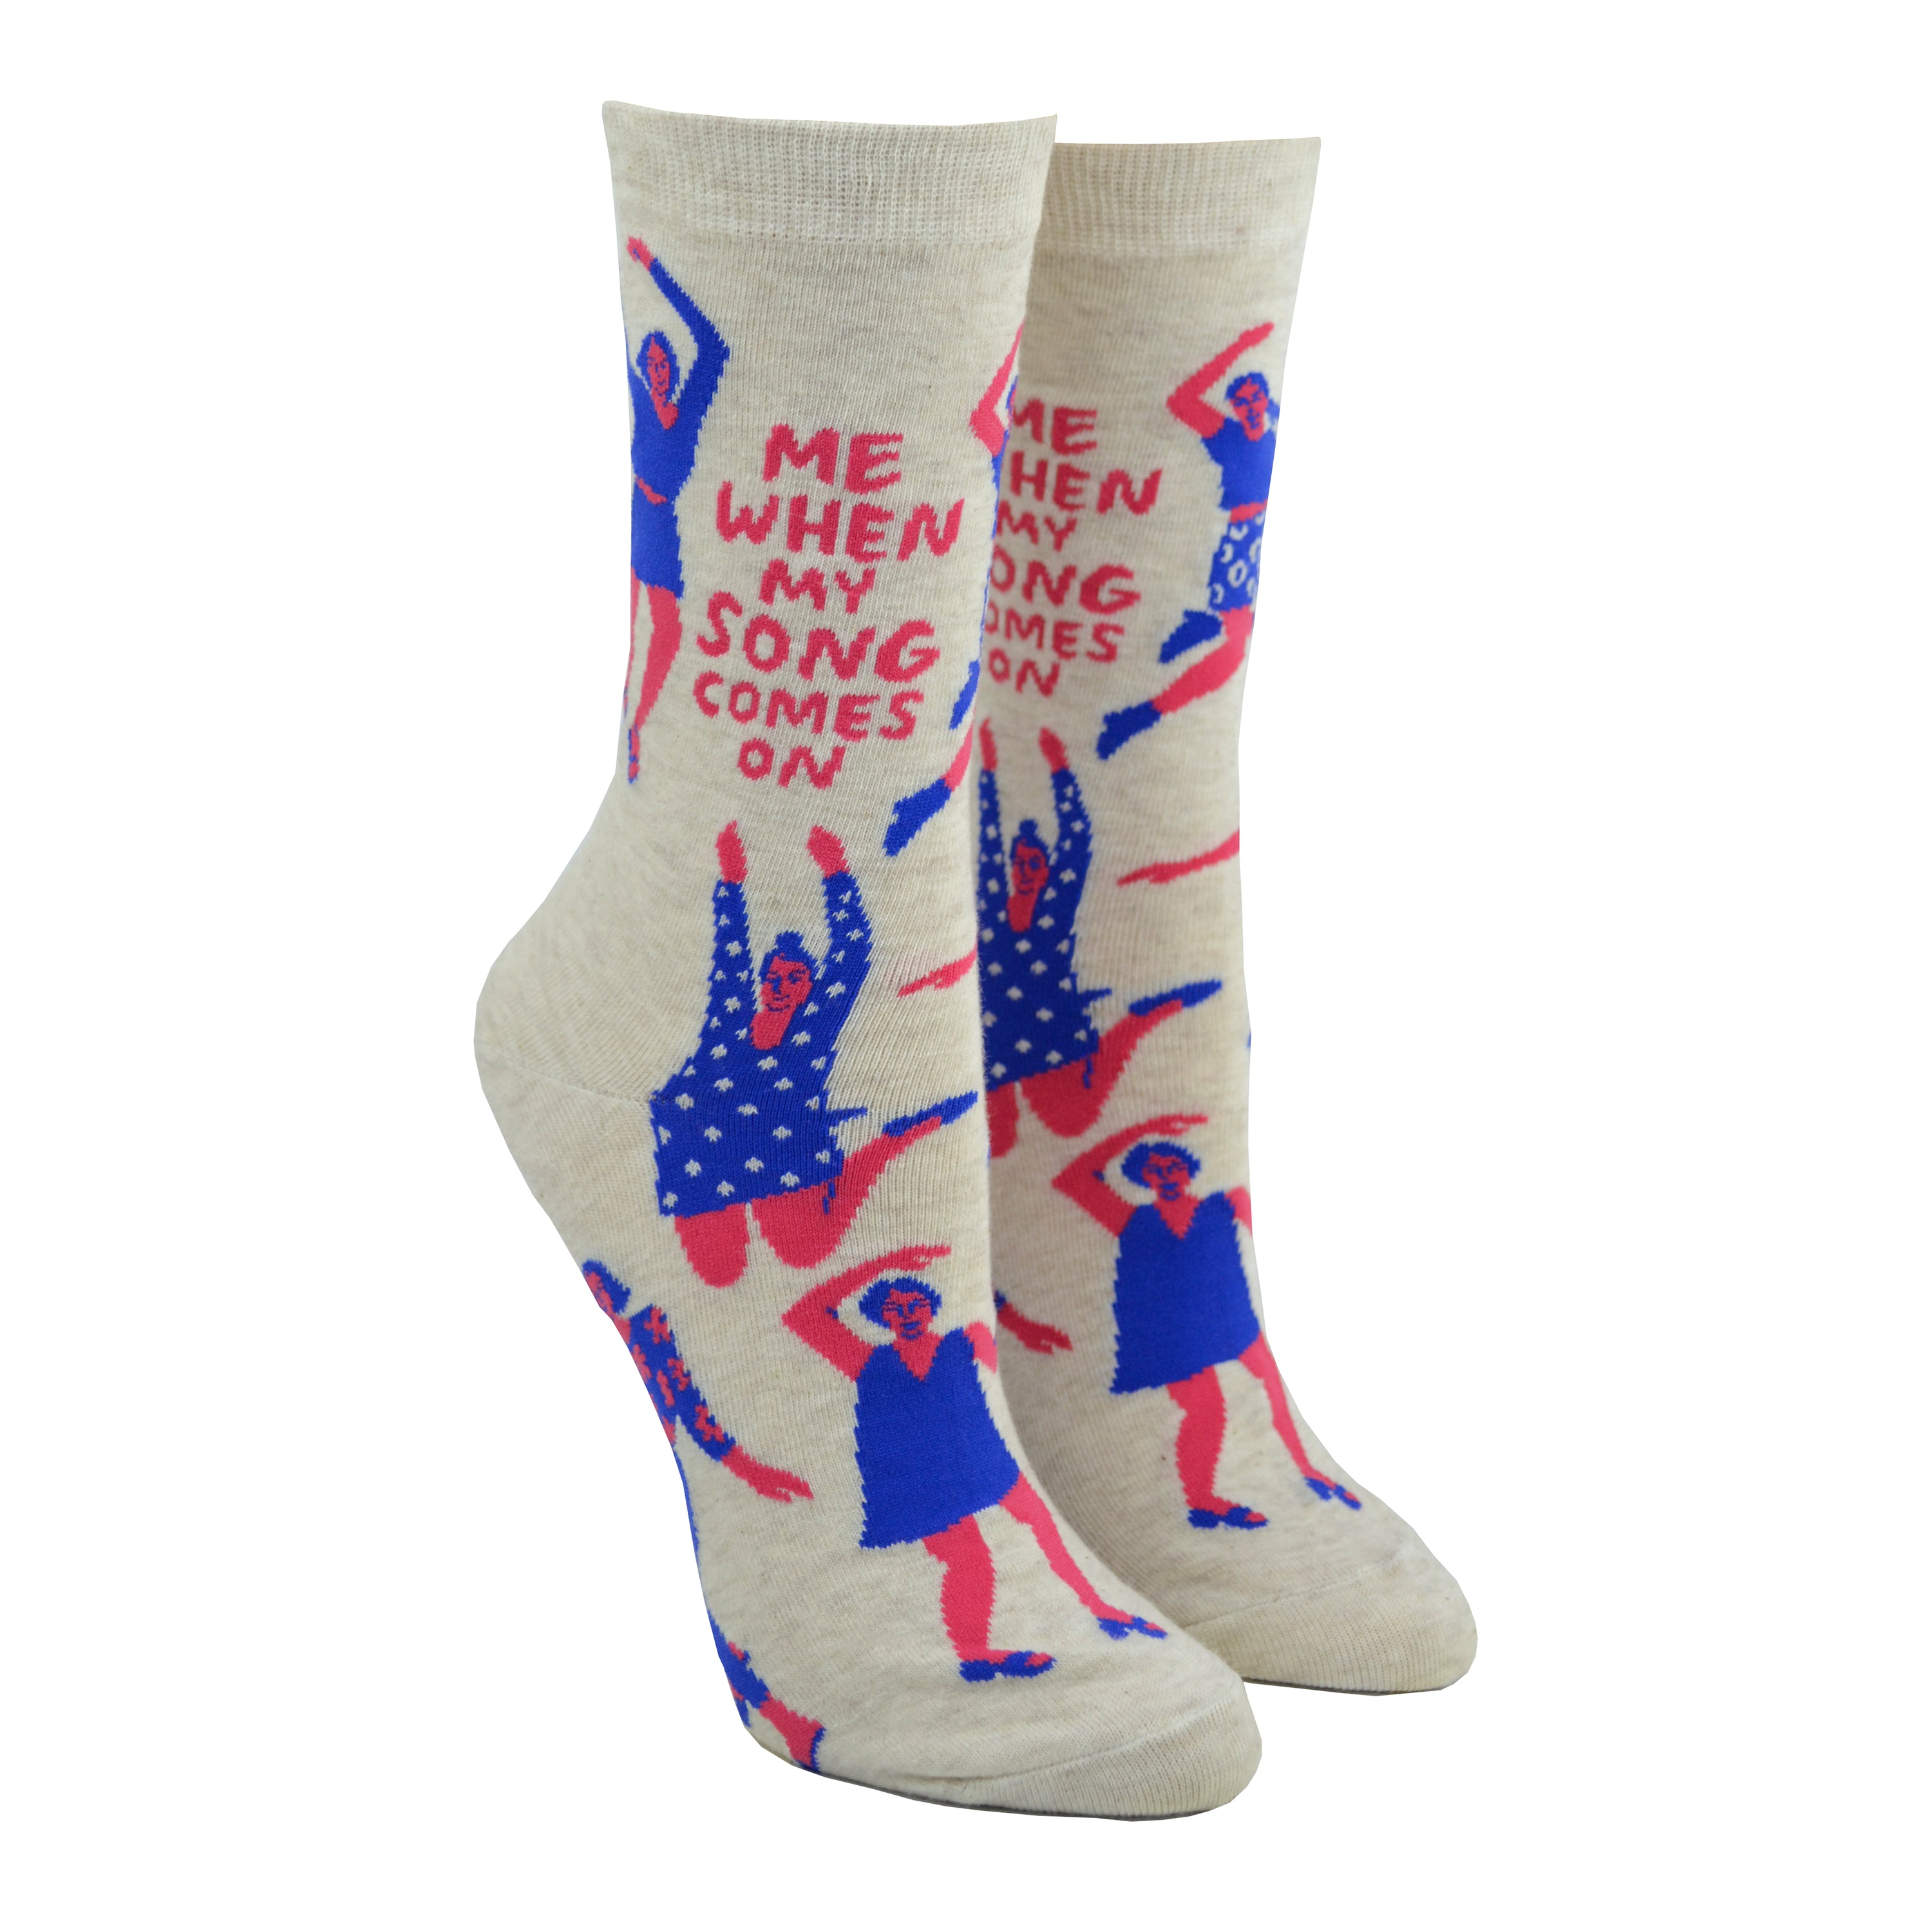 Shown on a leg form, these cream cotton women's novelty crew socks by the brand Blue Q feature pink women wearing purple clothes dancing in different styles and the quote 